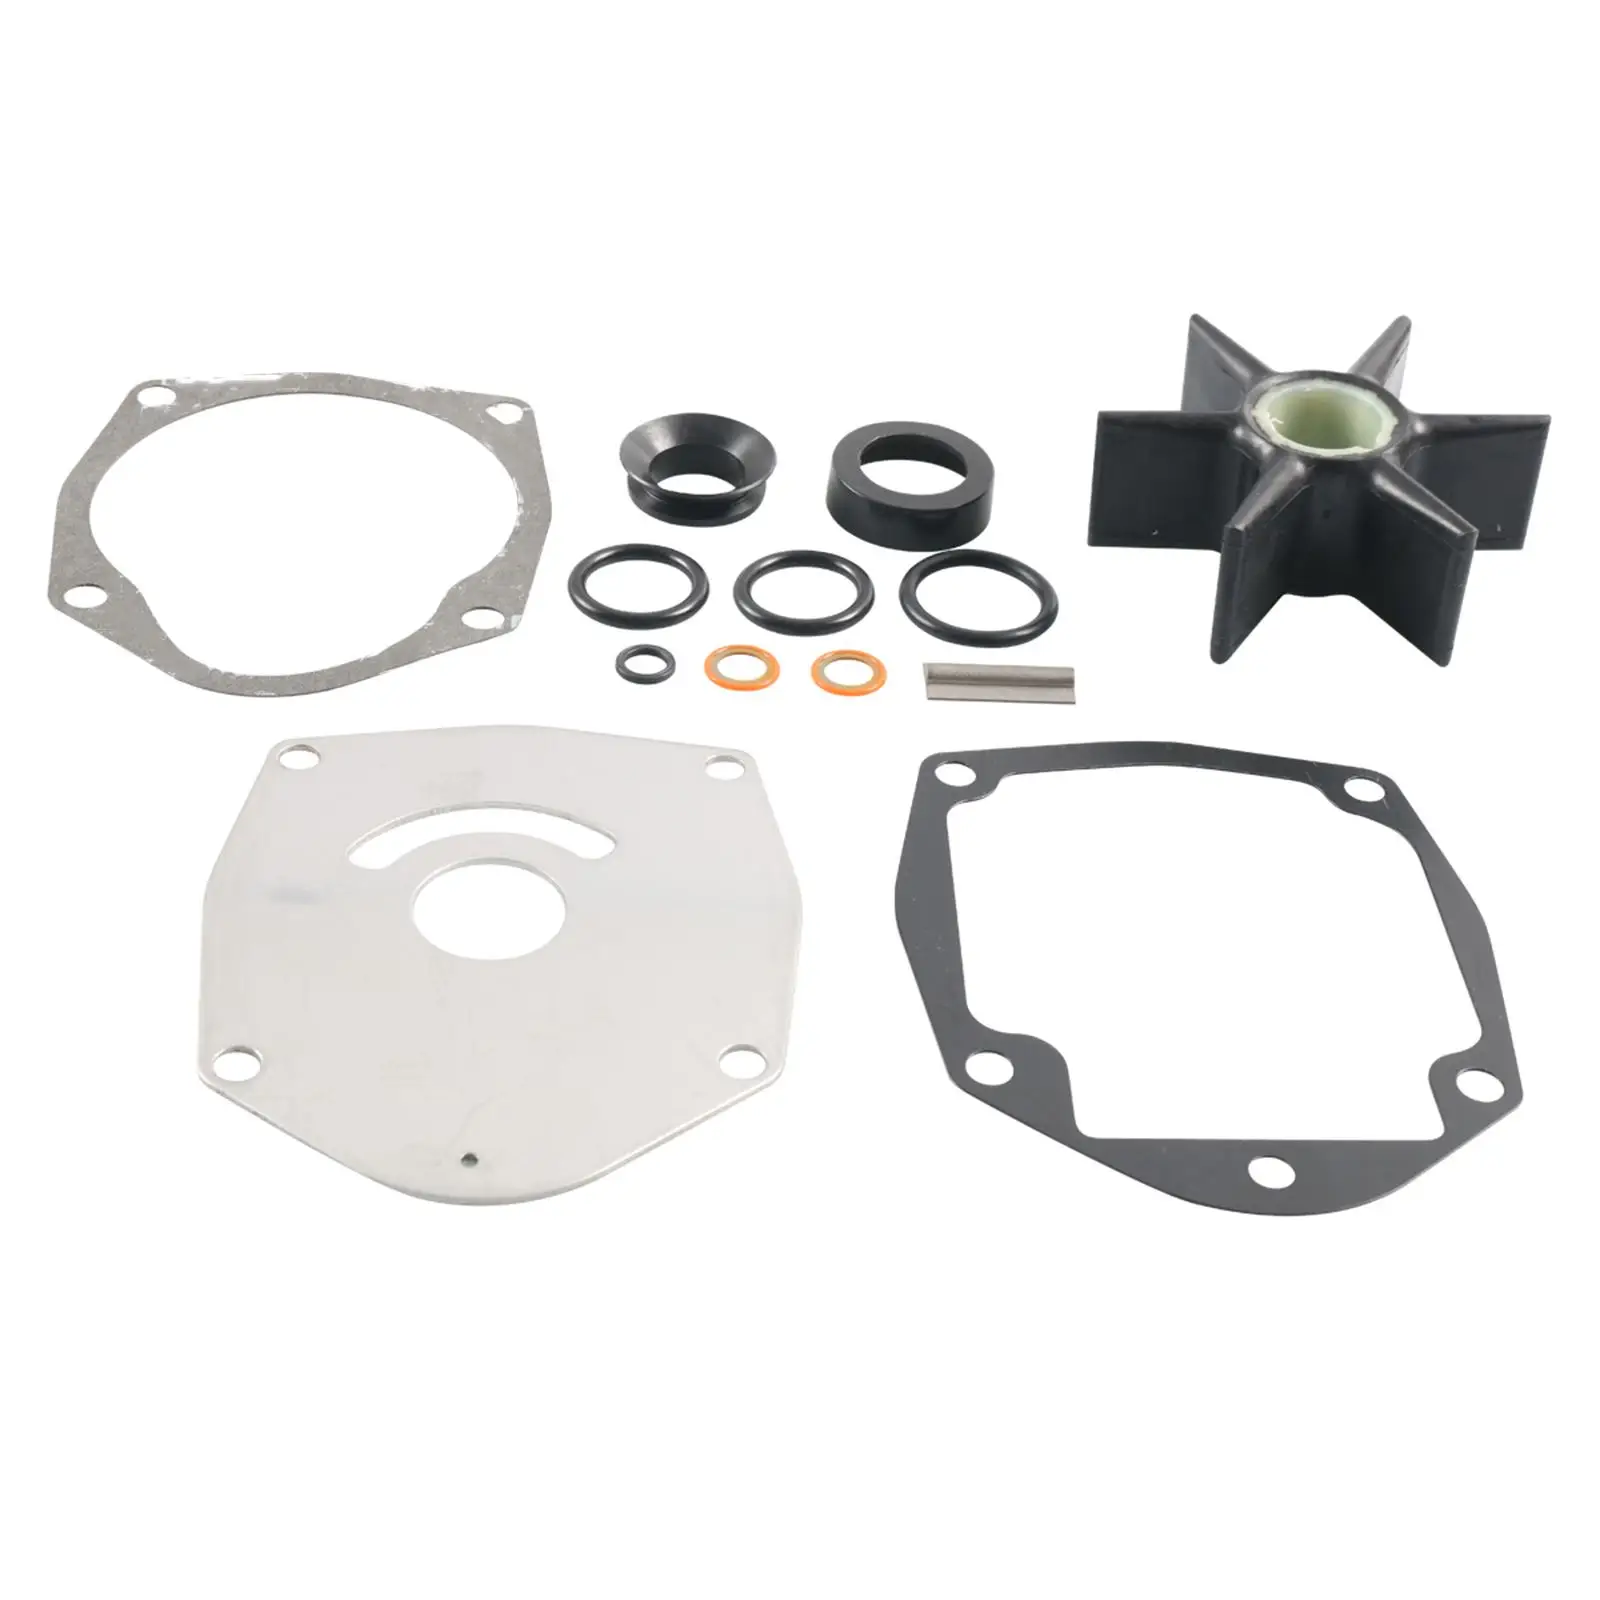 15 Pieces Water Pump Impeller Repair Kit 8M0100526 Fit for Mercury Marine Outboard Engines Replacement